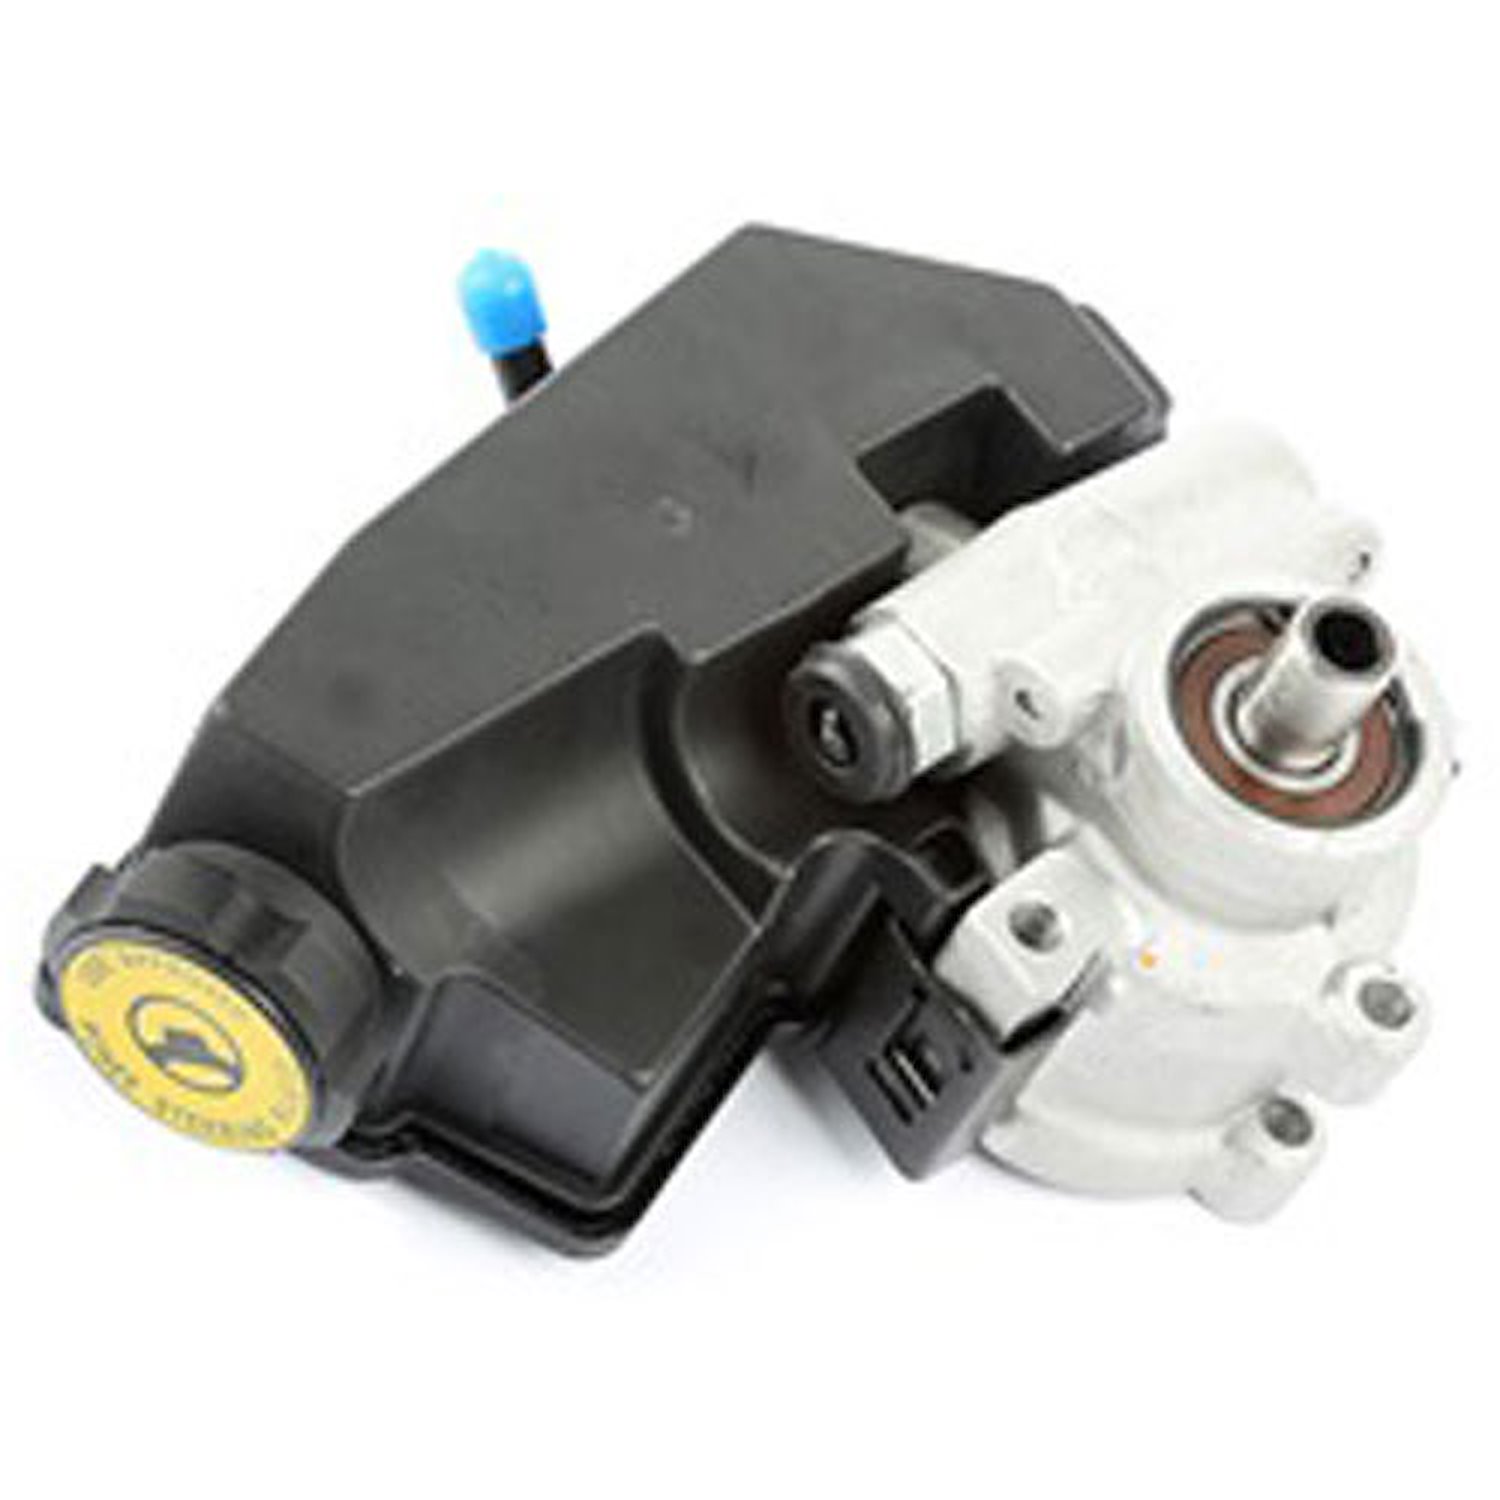 This power steering pump from Omix-ADA fits 96-98 Jeep Grand Cherokees with a 4.0L engine. Also fits